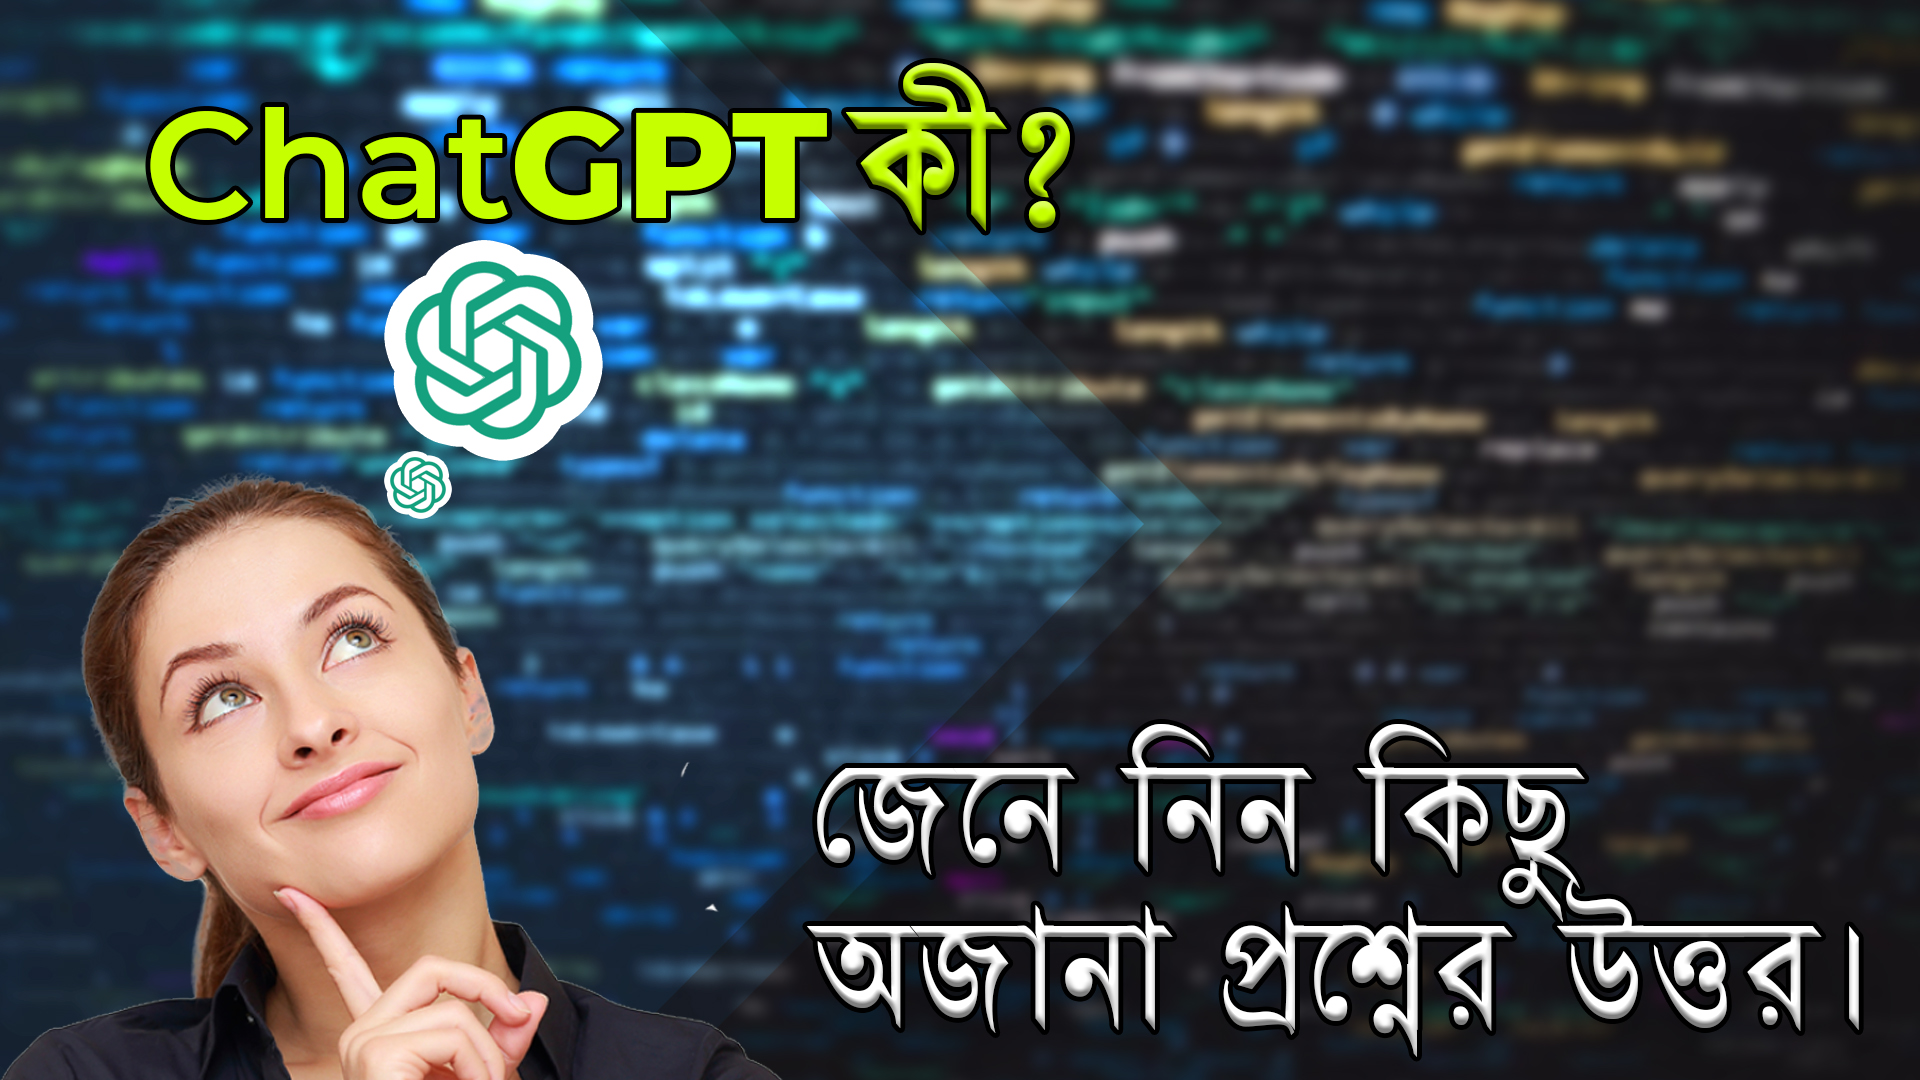 Chatgpt কি? What is ChatGPT?